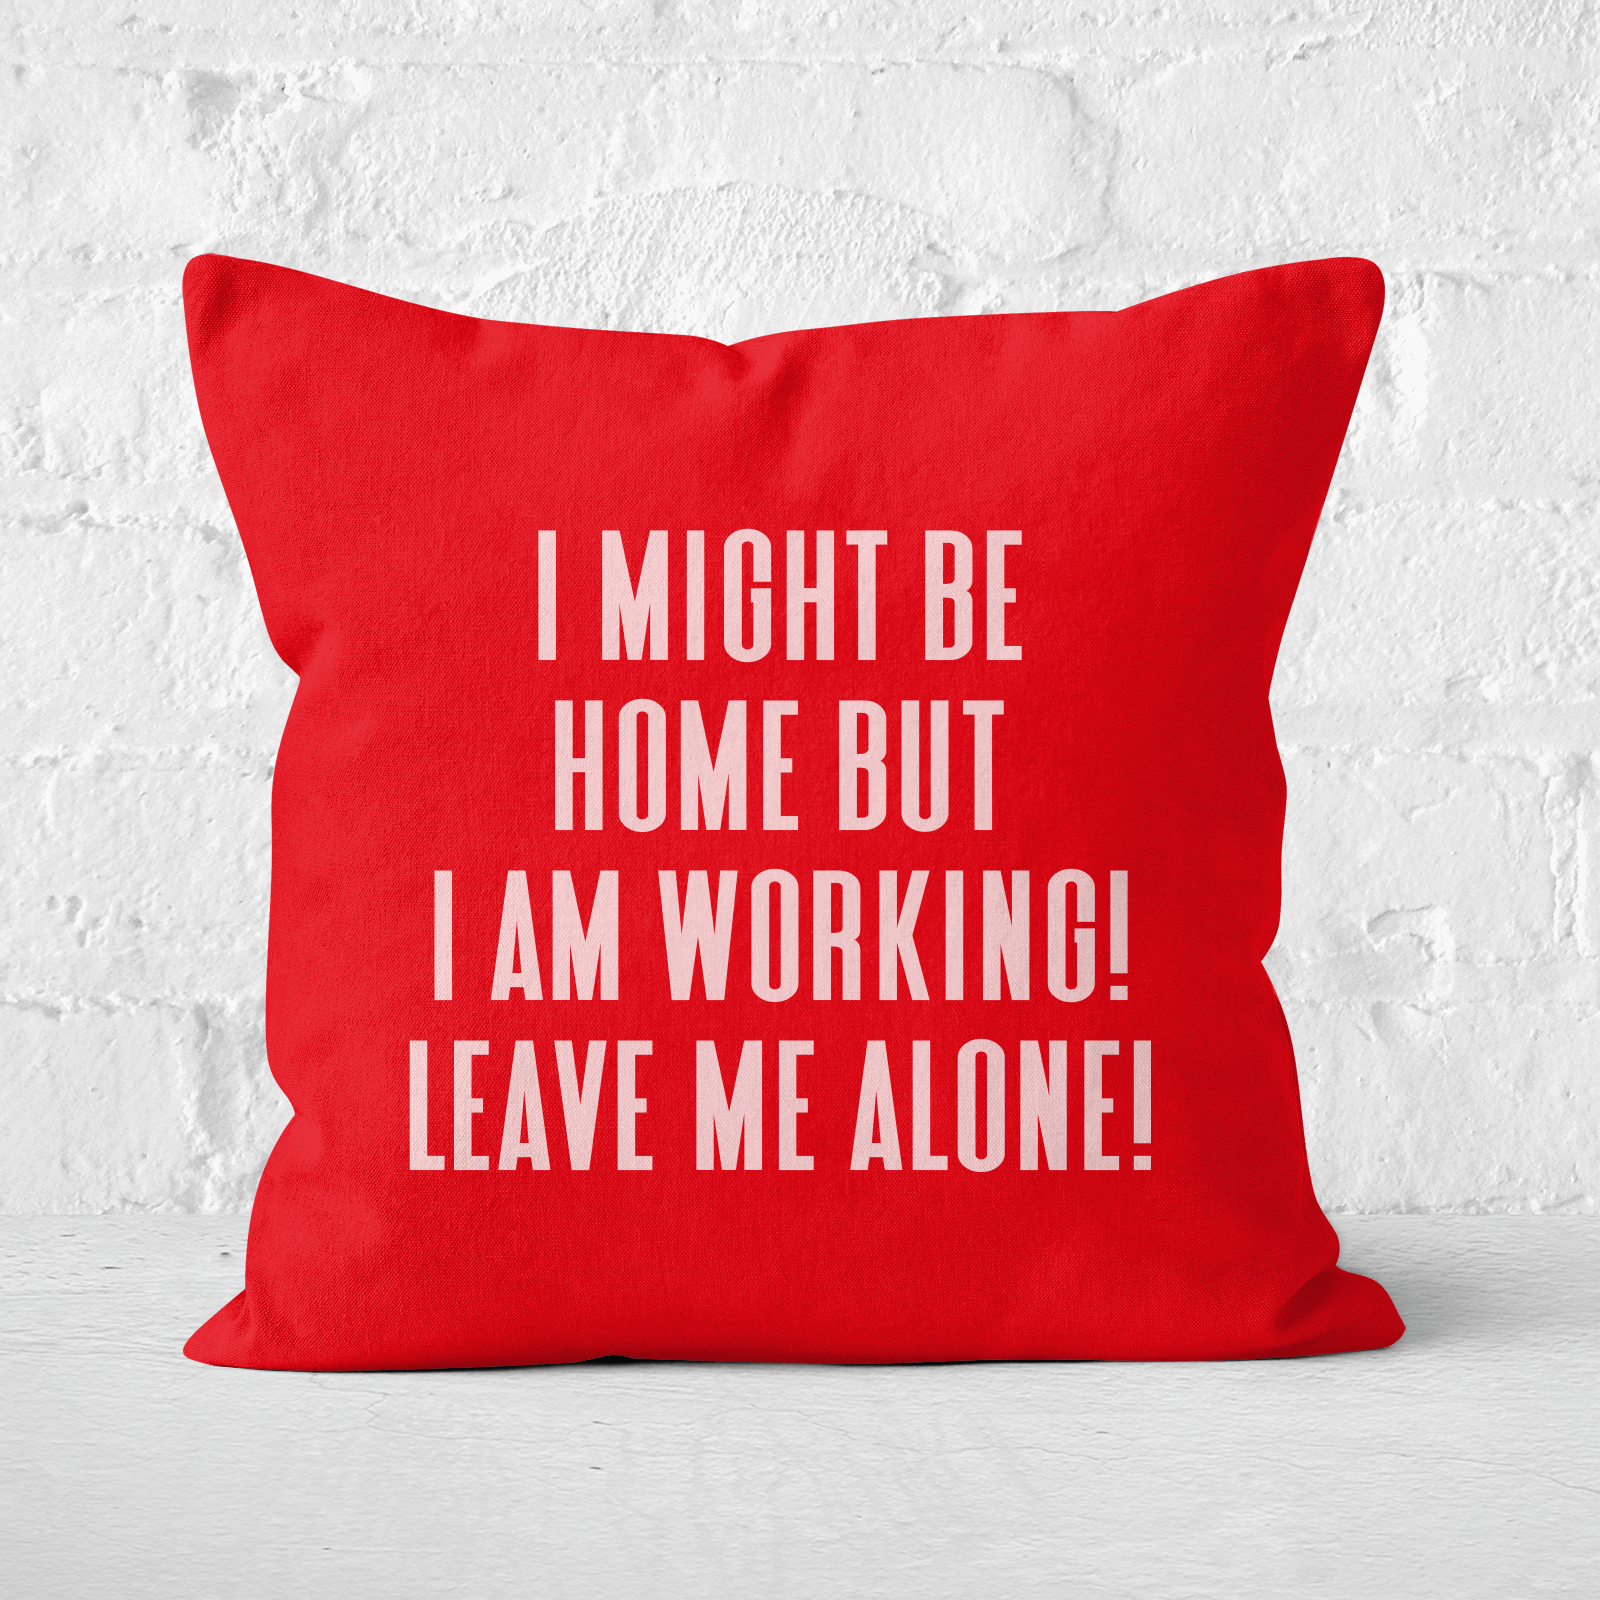 I Might Be Home But I Am Working Leave Me Alone! Square Cushion - 60x60cm - Soft Touch